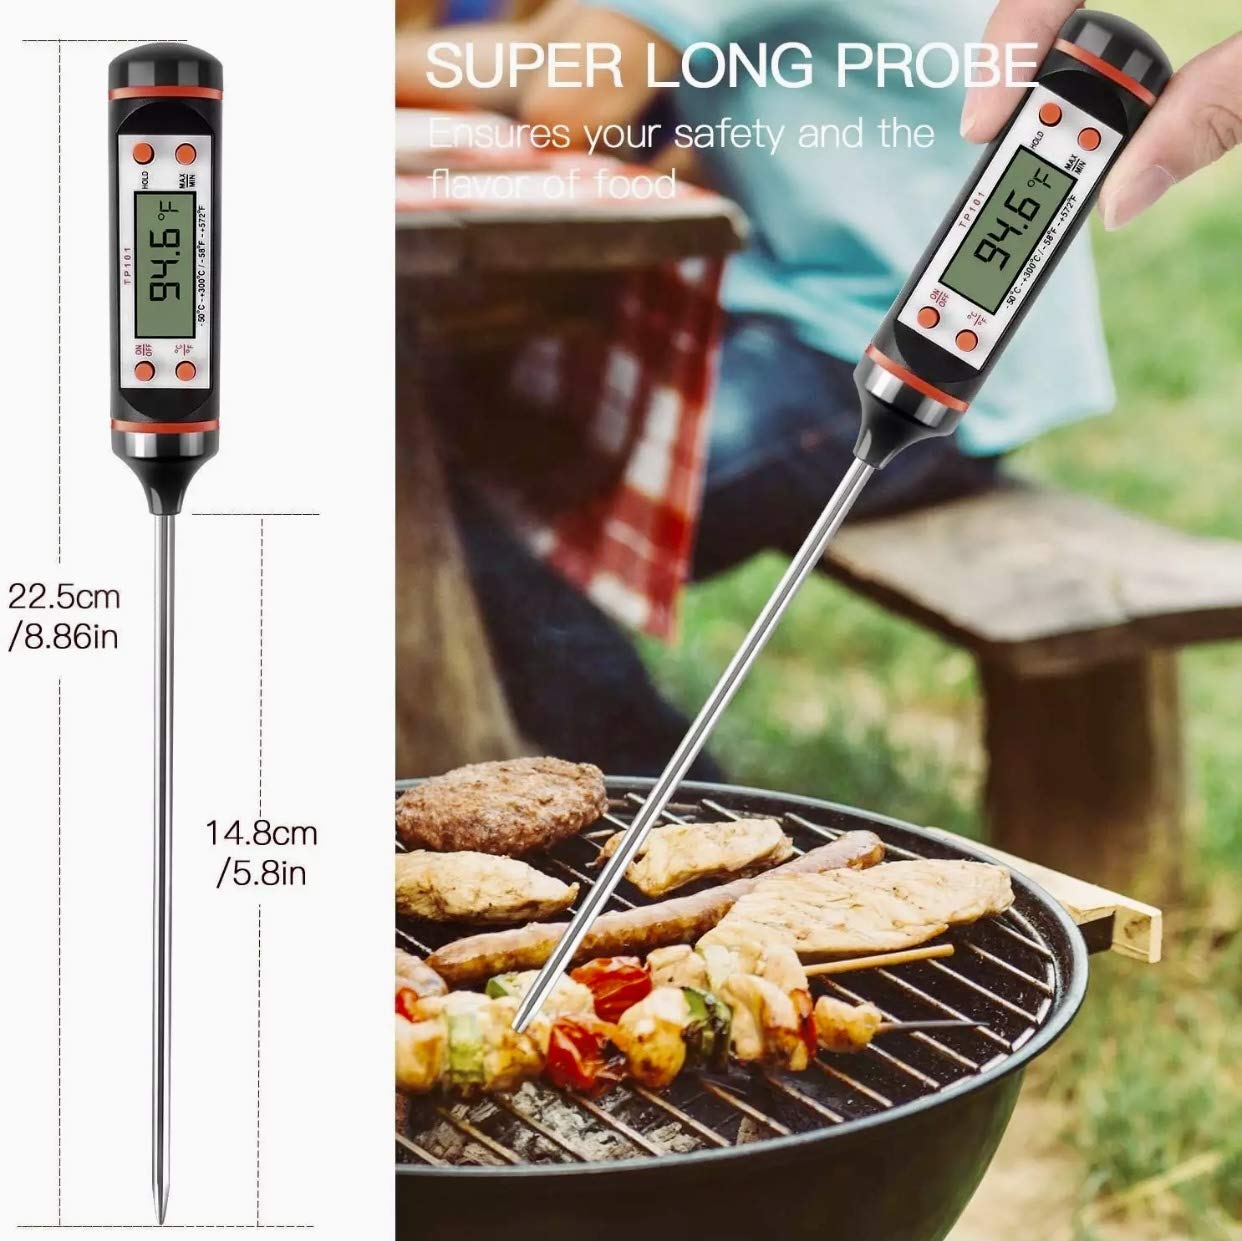 Digital Kitchen Thermometer Coffee Thermometer Tea Thermometer Food Thermometer Waterproof Digital Instant Read Meat Thermometer with Long Probe for Liquid, Candle, Food, Milk, Fry, Candy, Roast